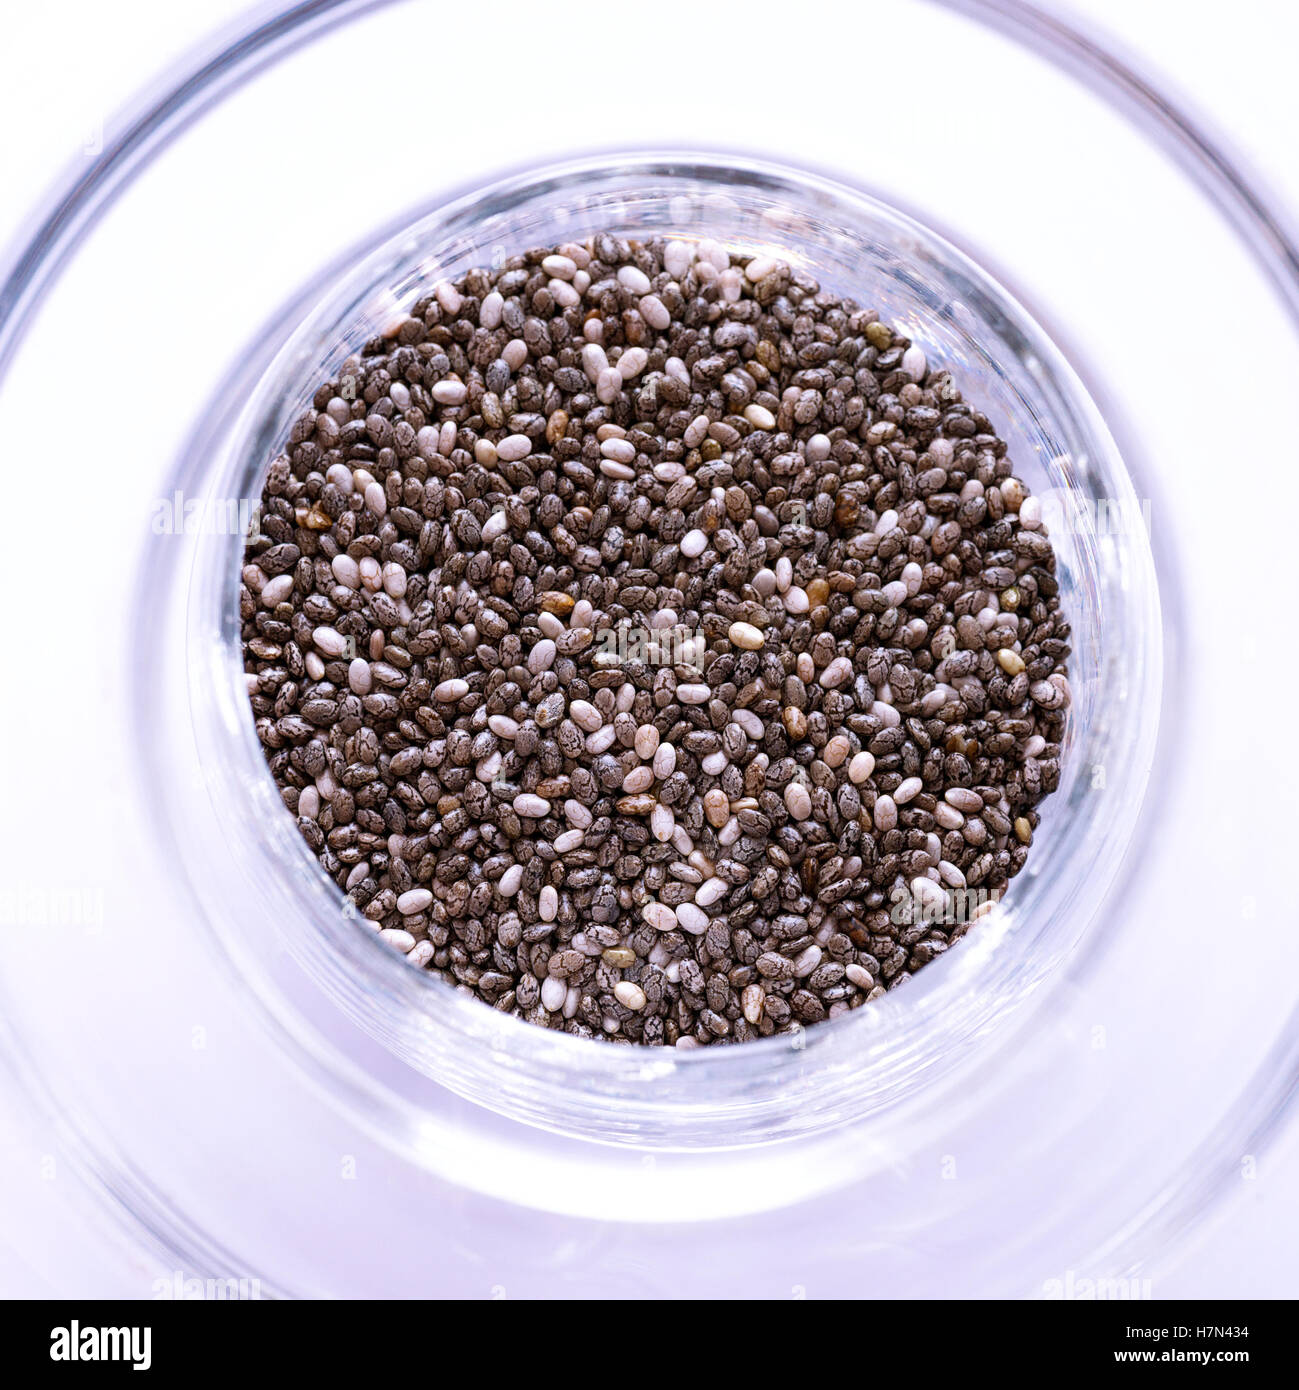 Square overhead shot of organic chia seeds in a glass dish with bright light to give a blue tint to the white background, Stock Photo